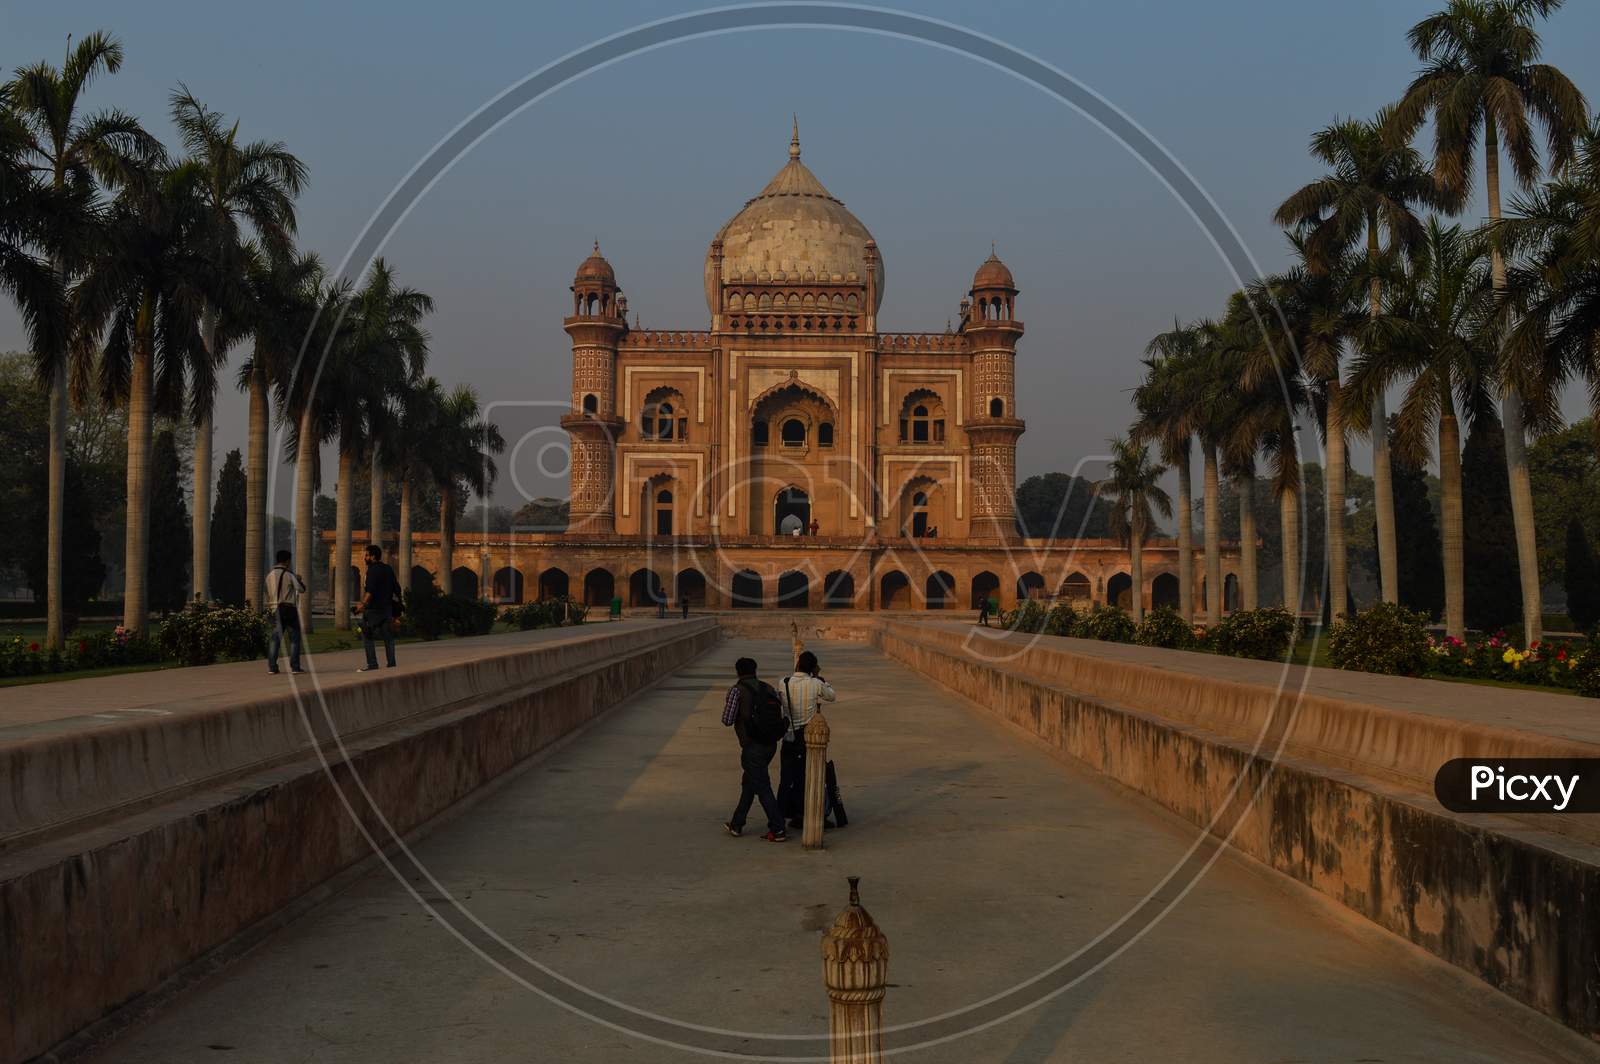 A Bunch Of Photography Students Standing And Taking Picture In-Front Of Safdarjung Tomb Memorial At Winter Morning.